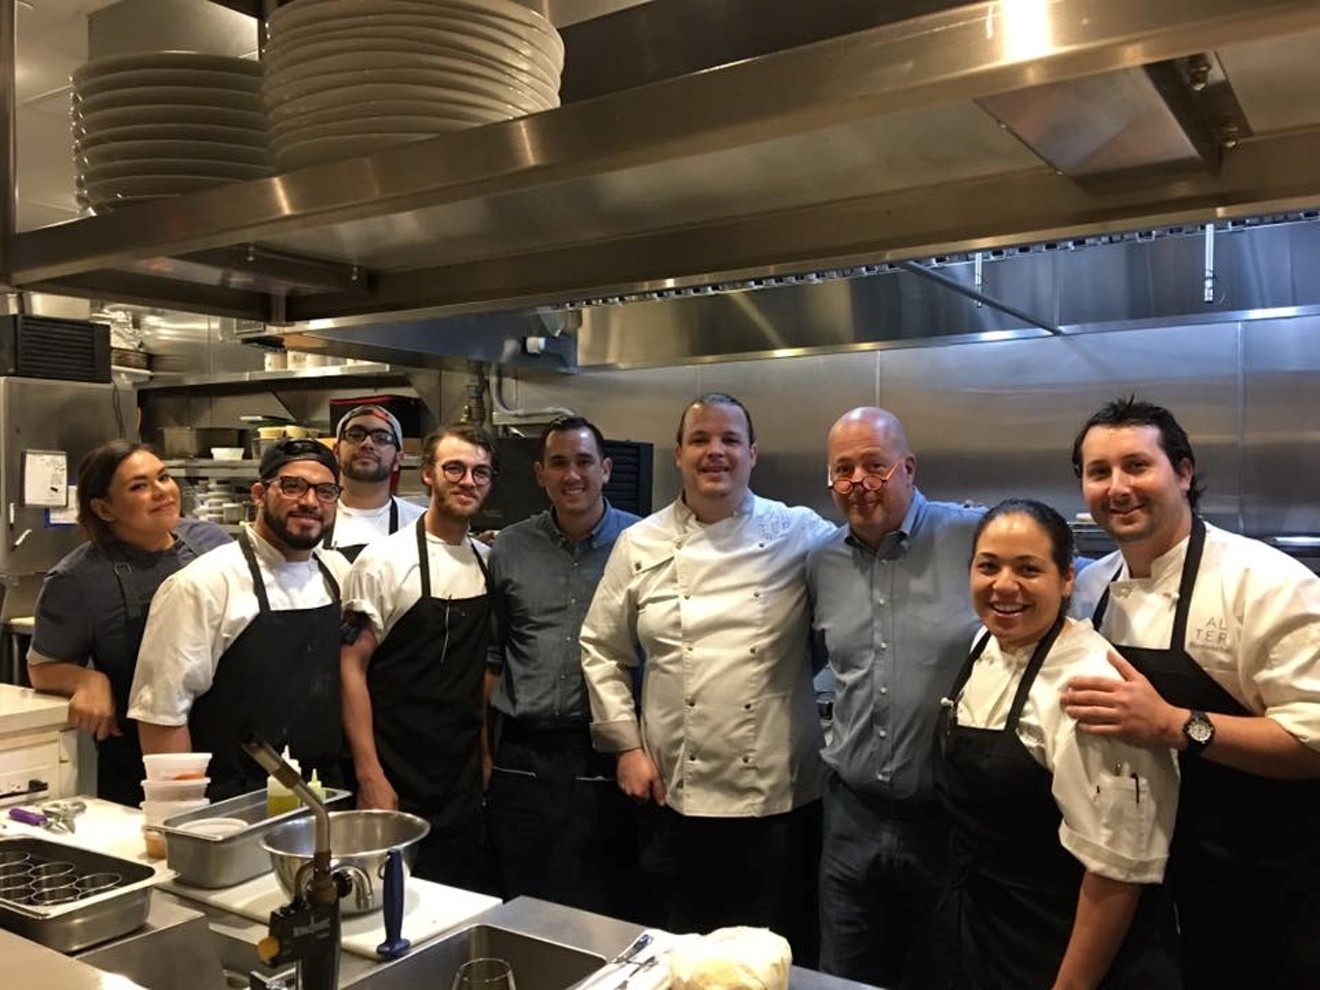 The Alter crew with Andrew Zimmern.